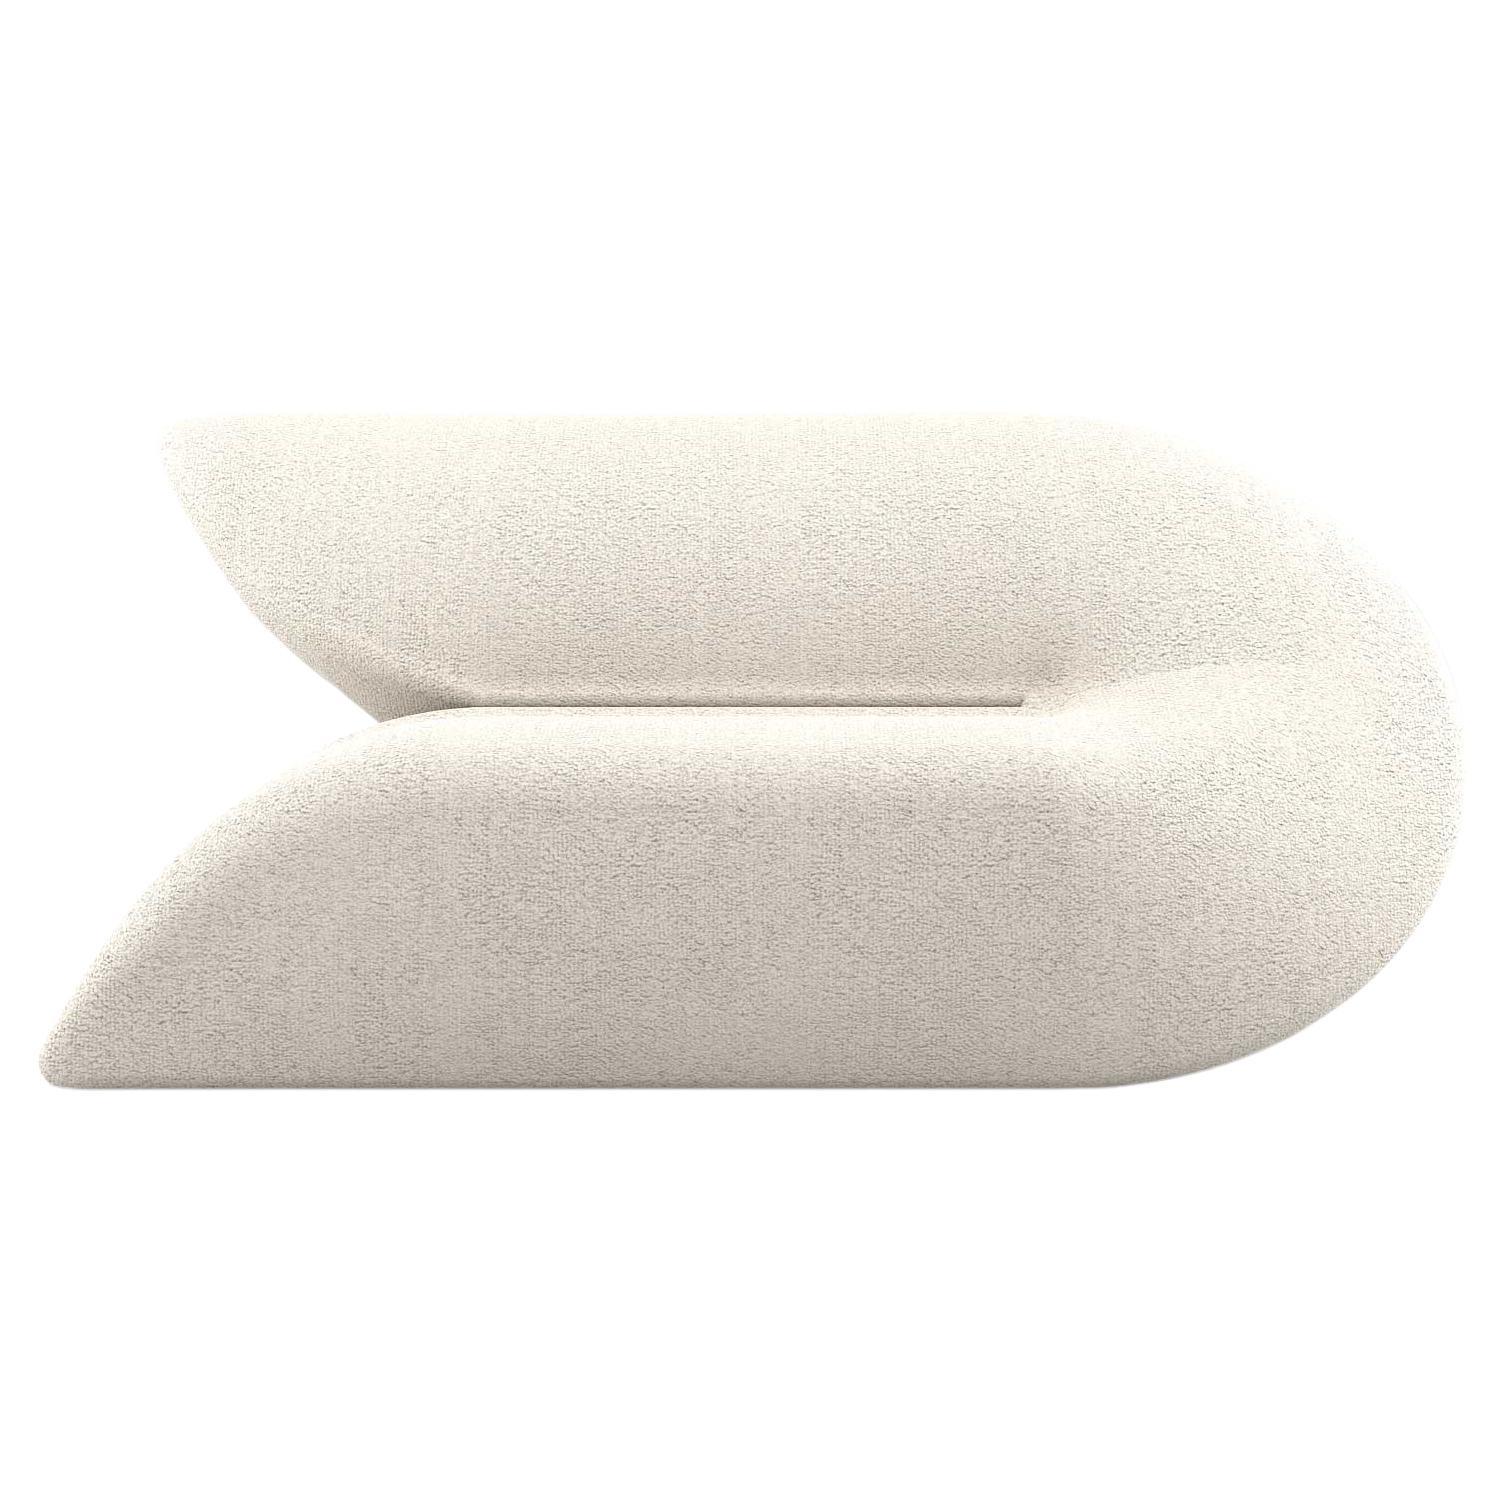 Delta Sofa - Modern White Upholstered Two Seat Sofa For Sale